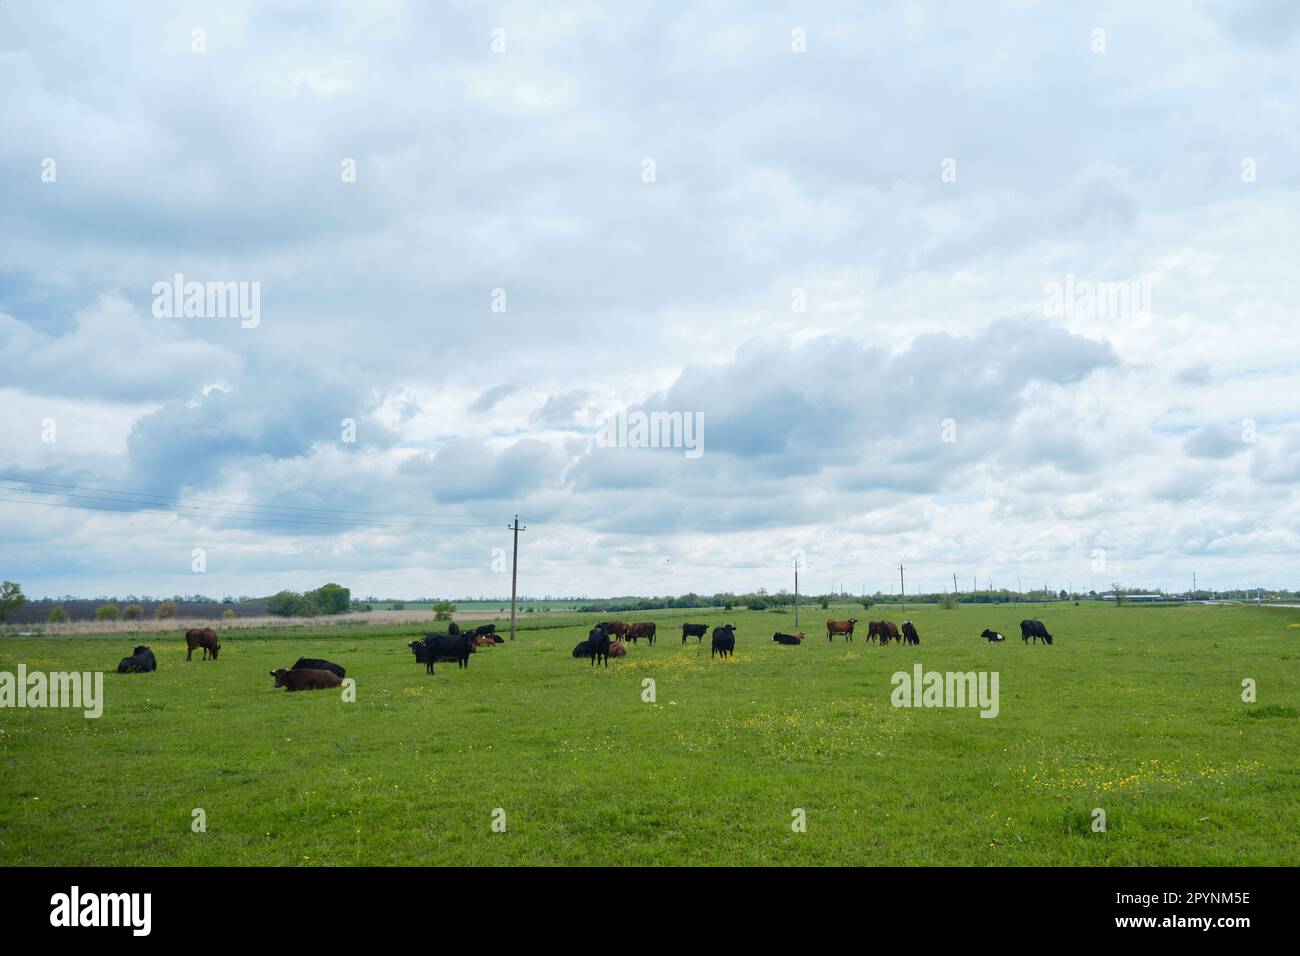 Agriculture industry concept. Farm purebred animals group of cattle walk and sleep in grass among yellow flowers in spring. Herd of cows graze in gree Stock Photo